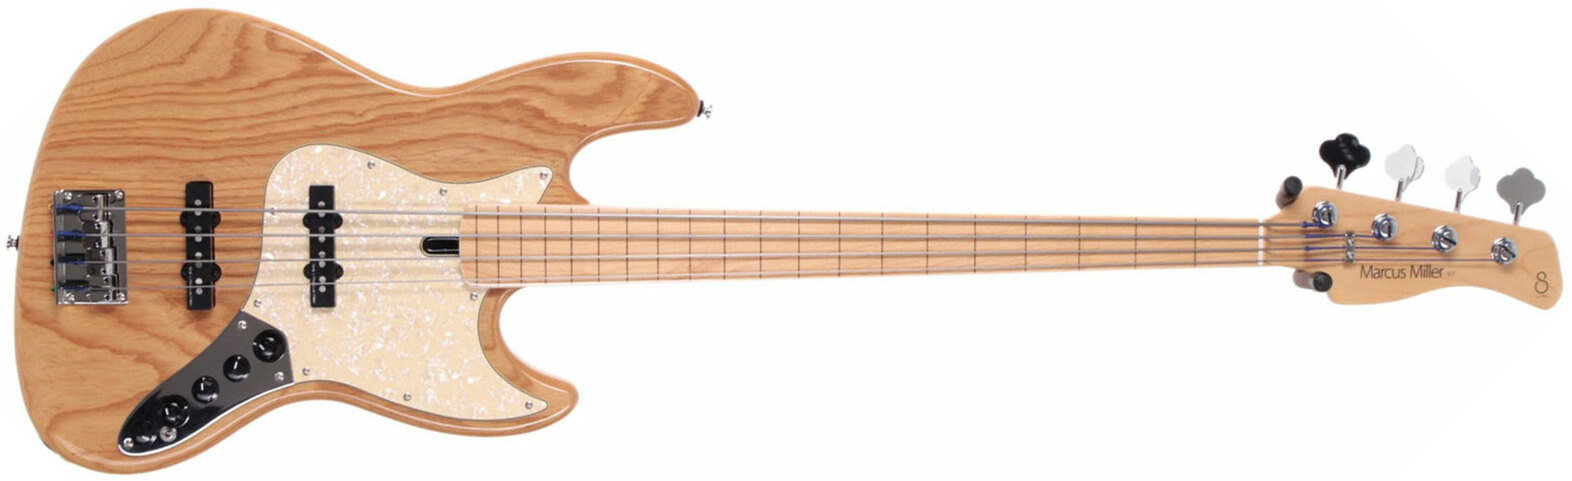 Marcus Miller V7 Swamp Ash Fretless 4st 2nd Generation Active Mn - Natural - Solid body elektrische bas - Main picture